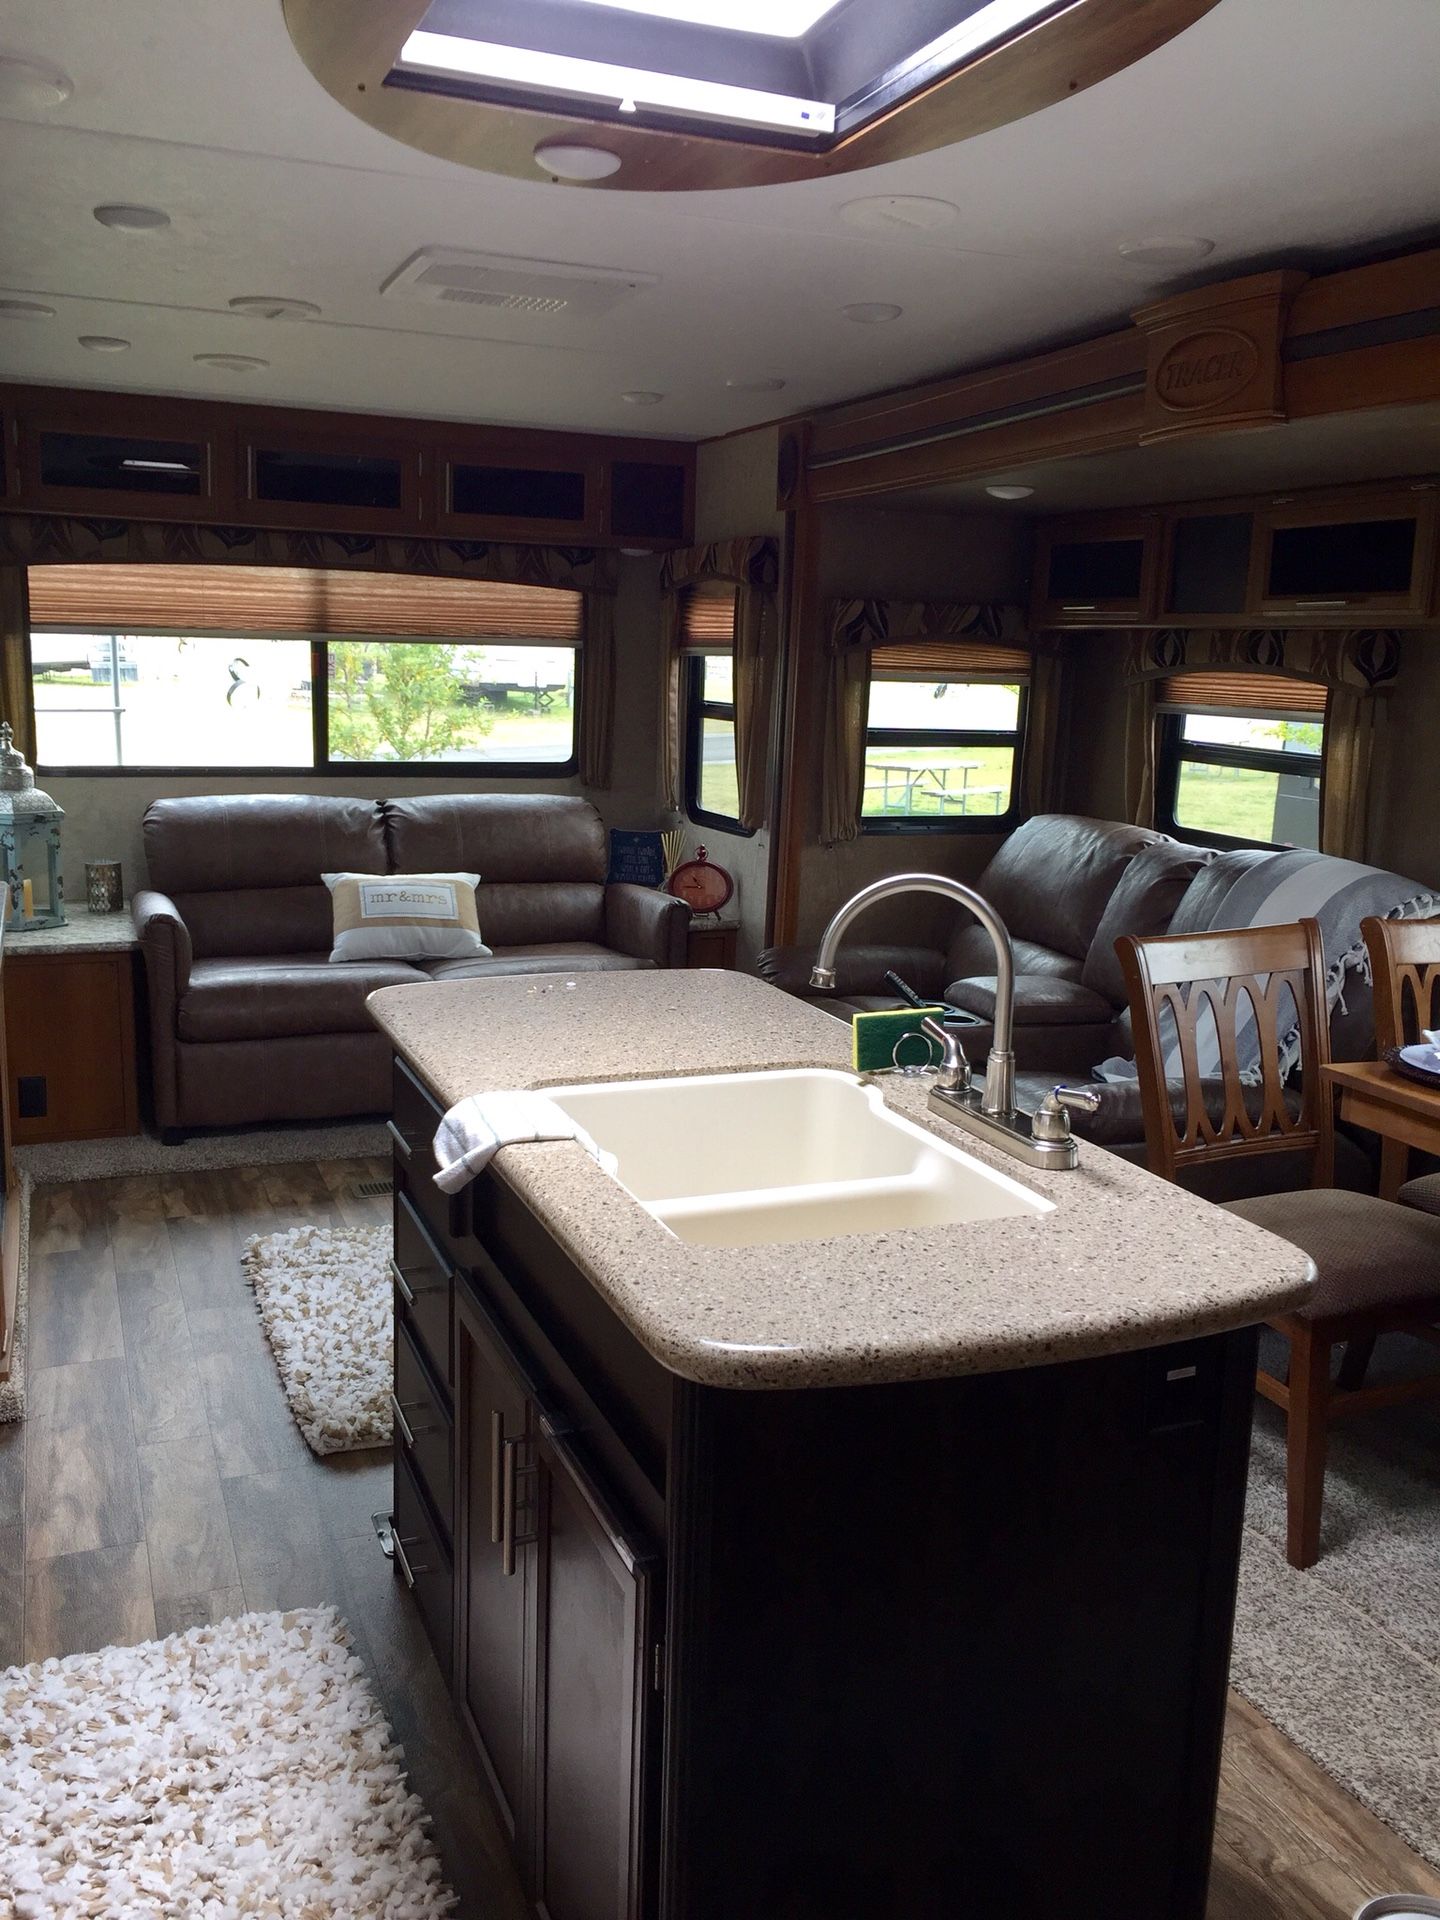 Camper- Travel Trailer- OPEN HOUSE 5/1-5/4- PRICE DROP - $19,900. VALUED $23,300